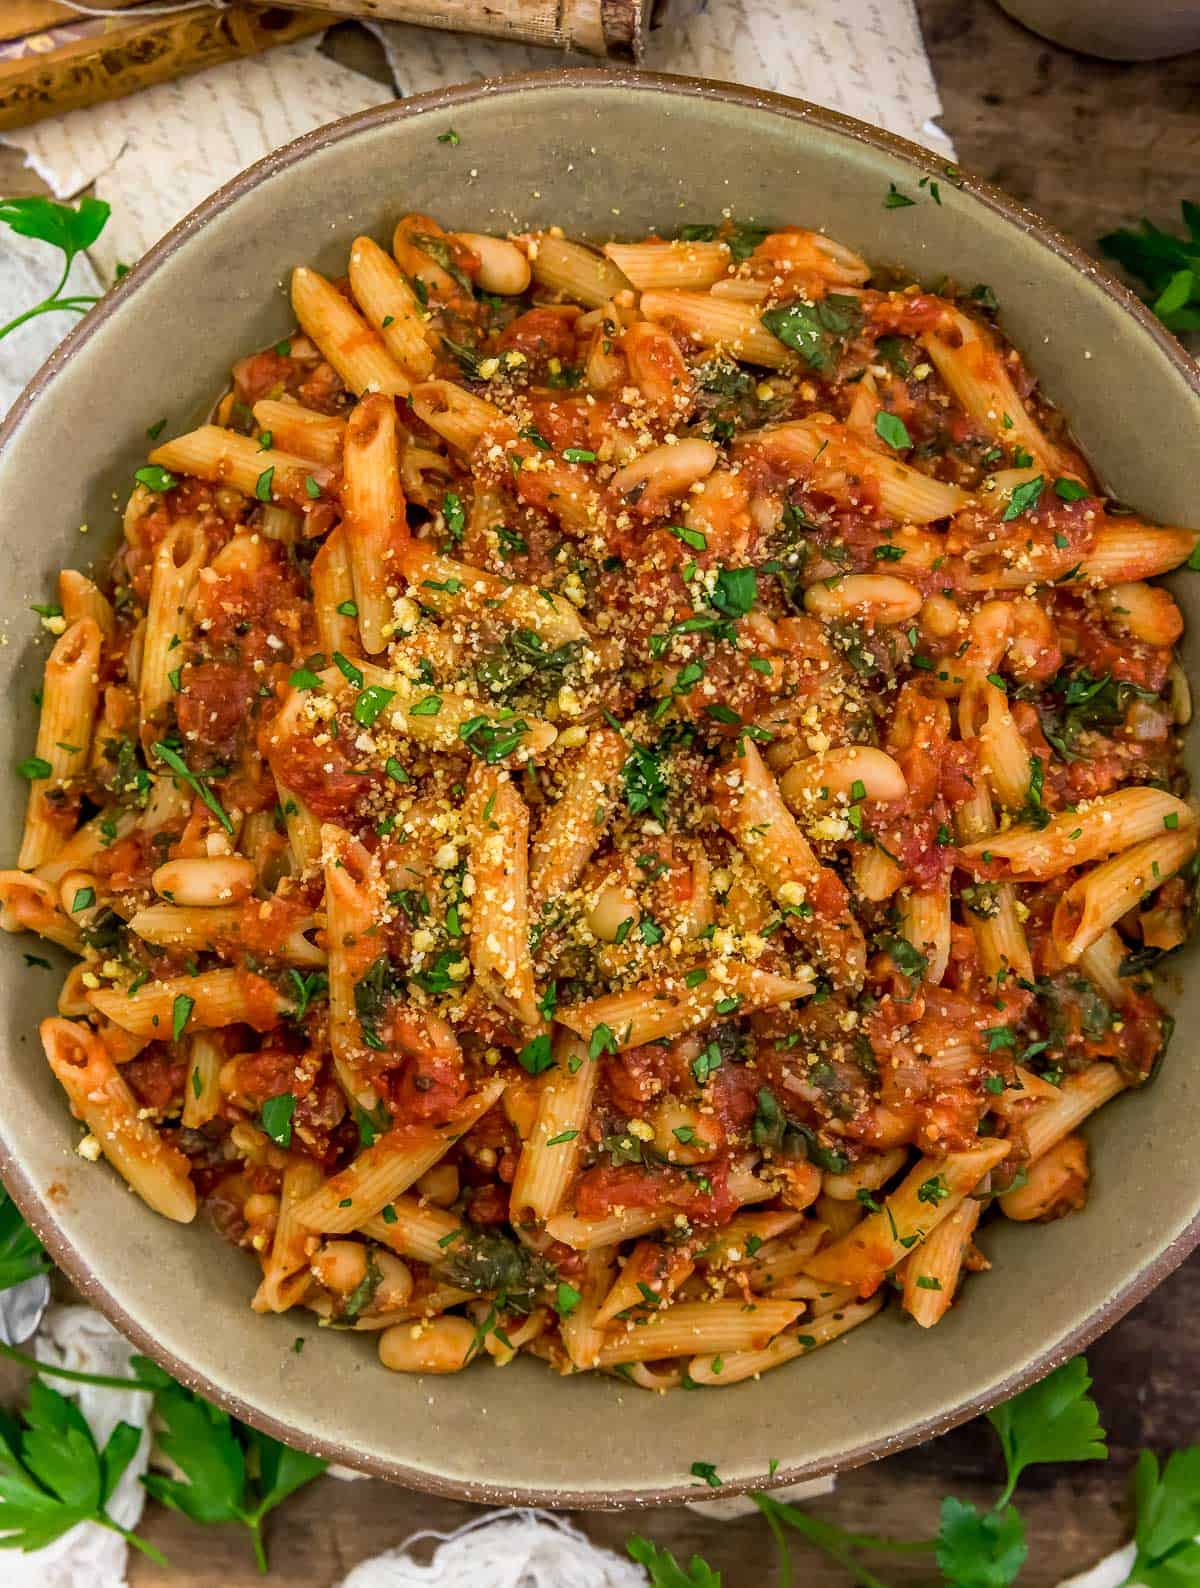 Kale and Beans in Spicy Pomodoro Sauce with pasta